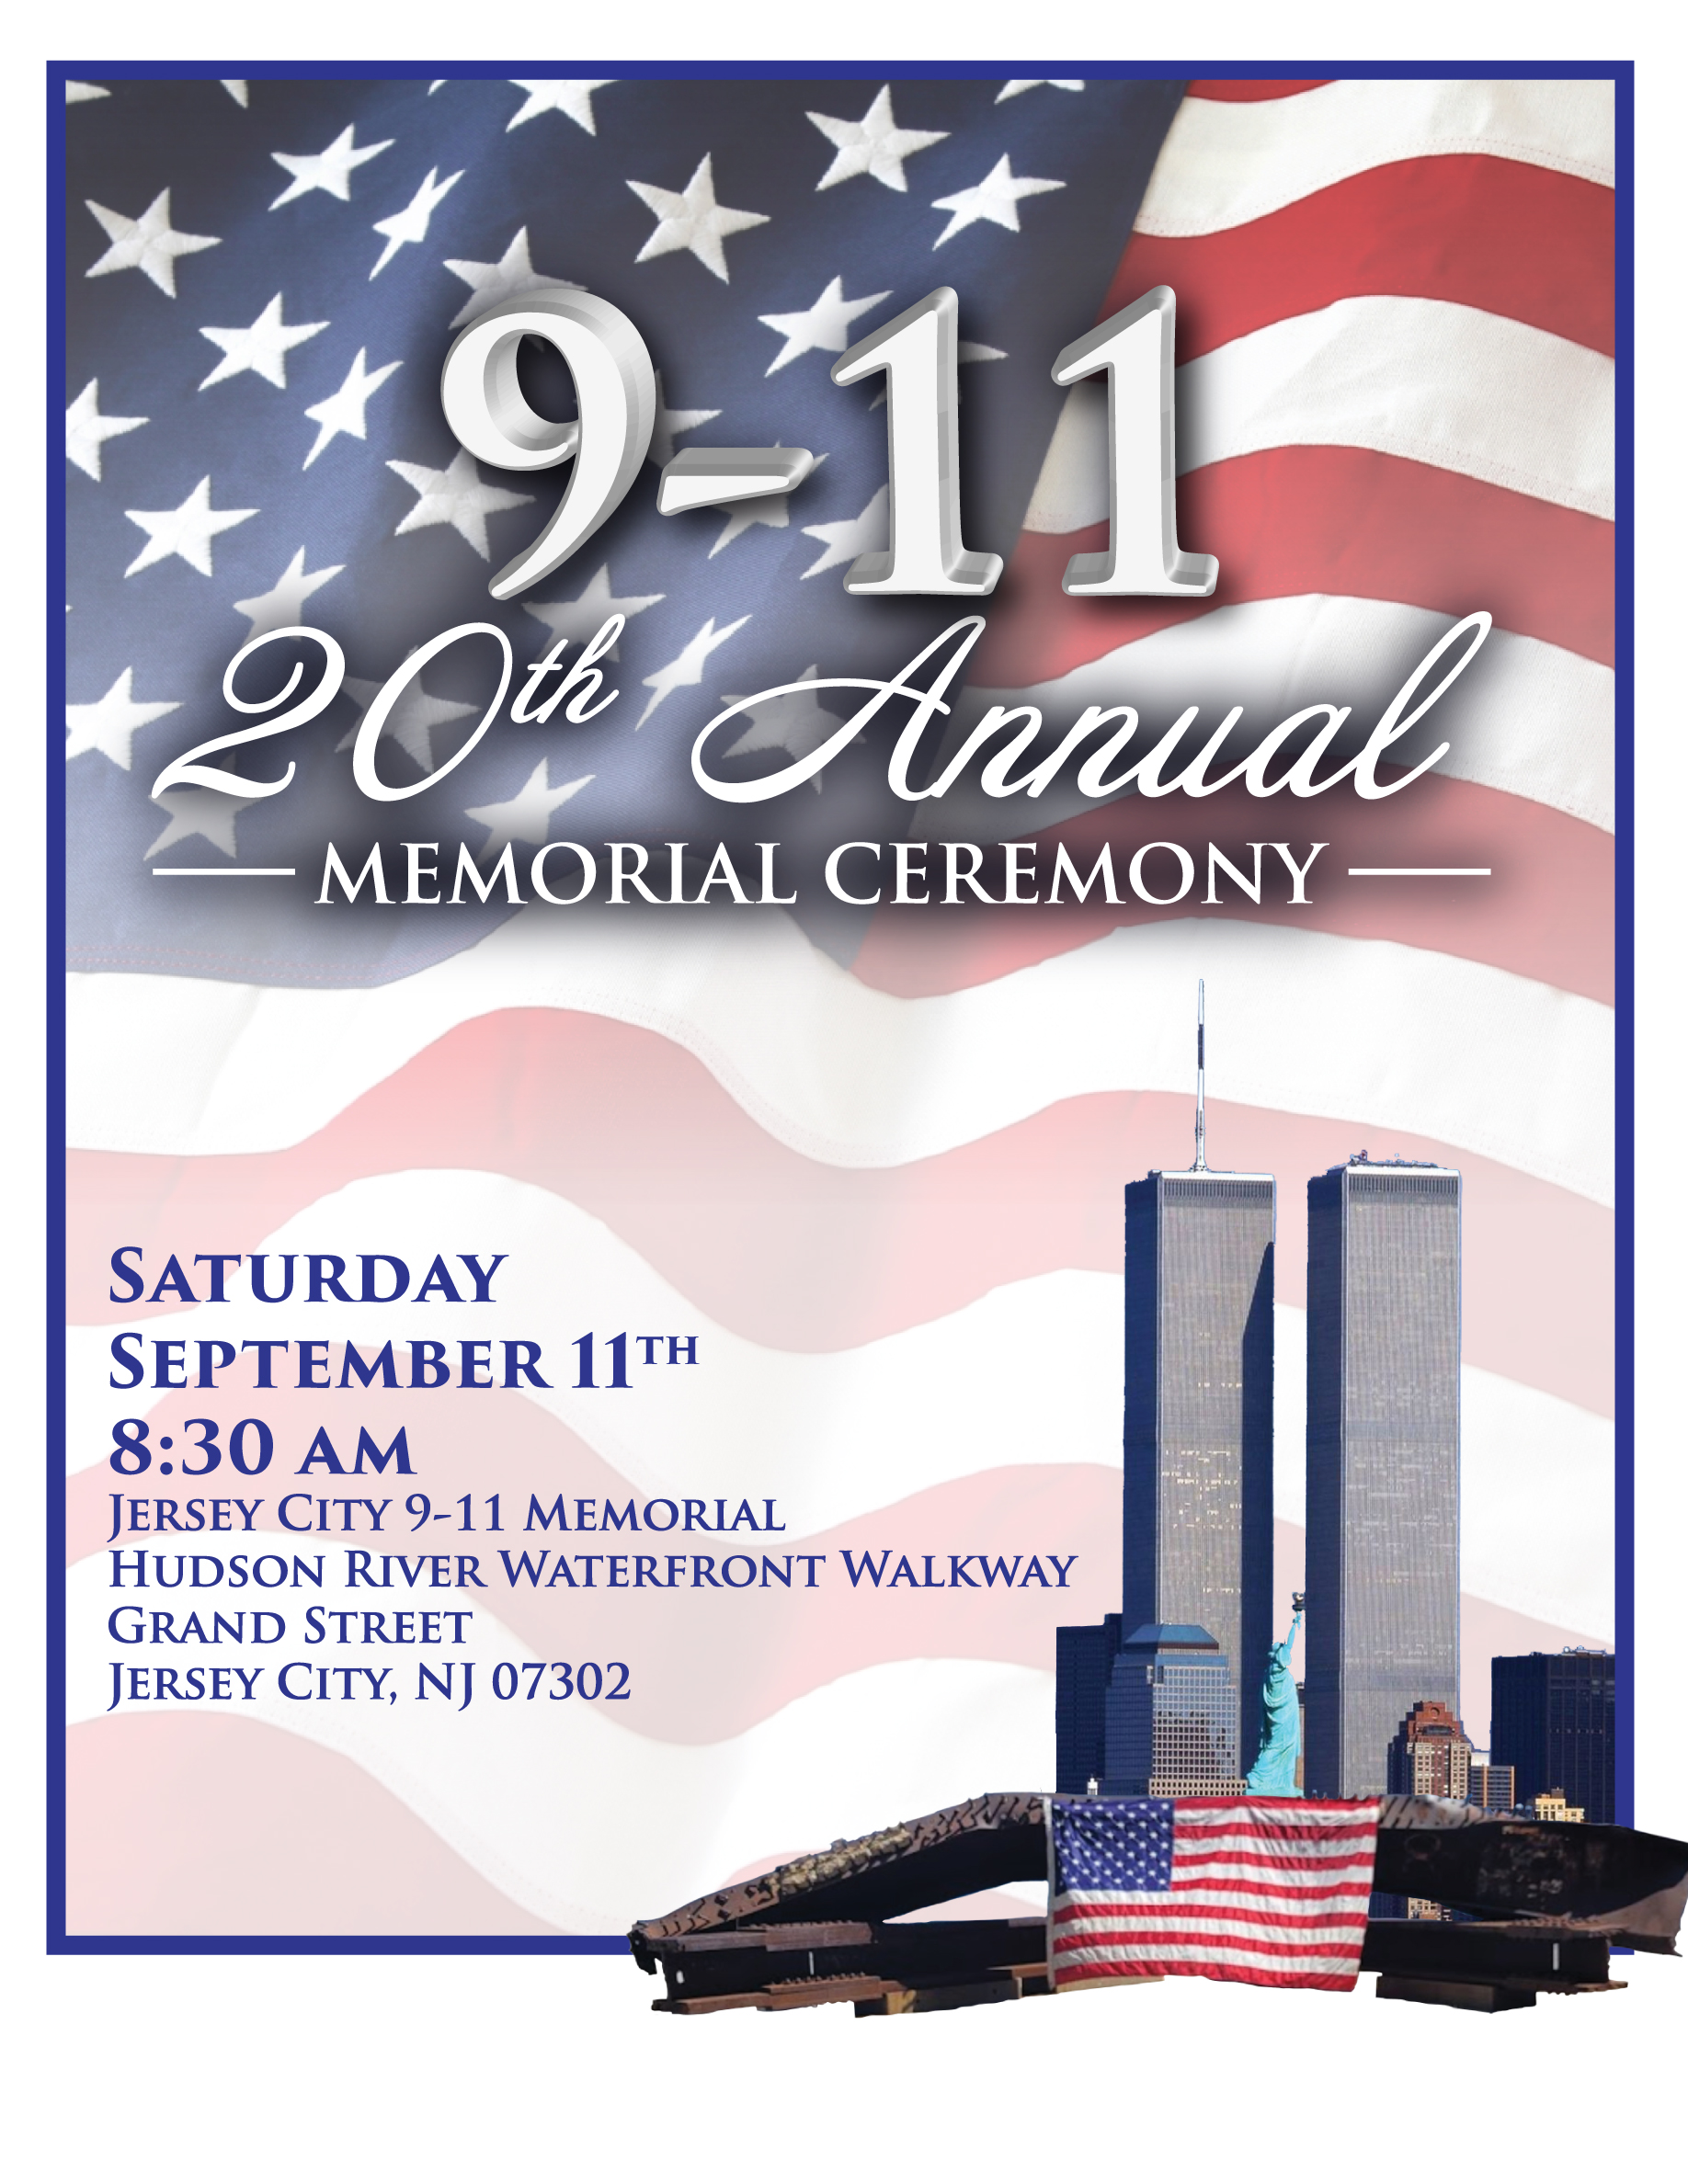 9/11 flyer American flag background with twin towers in the lower right hand corner